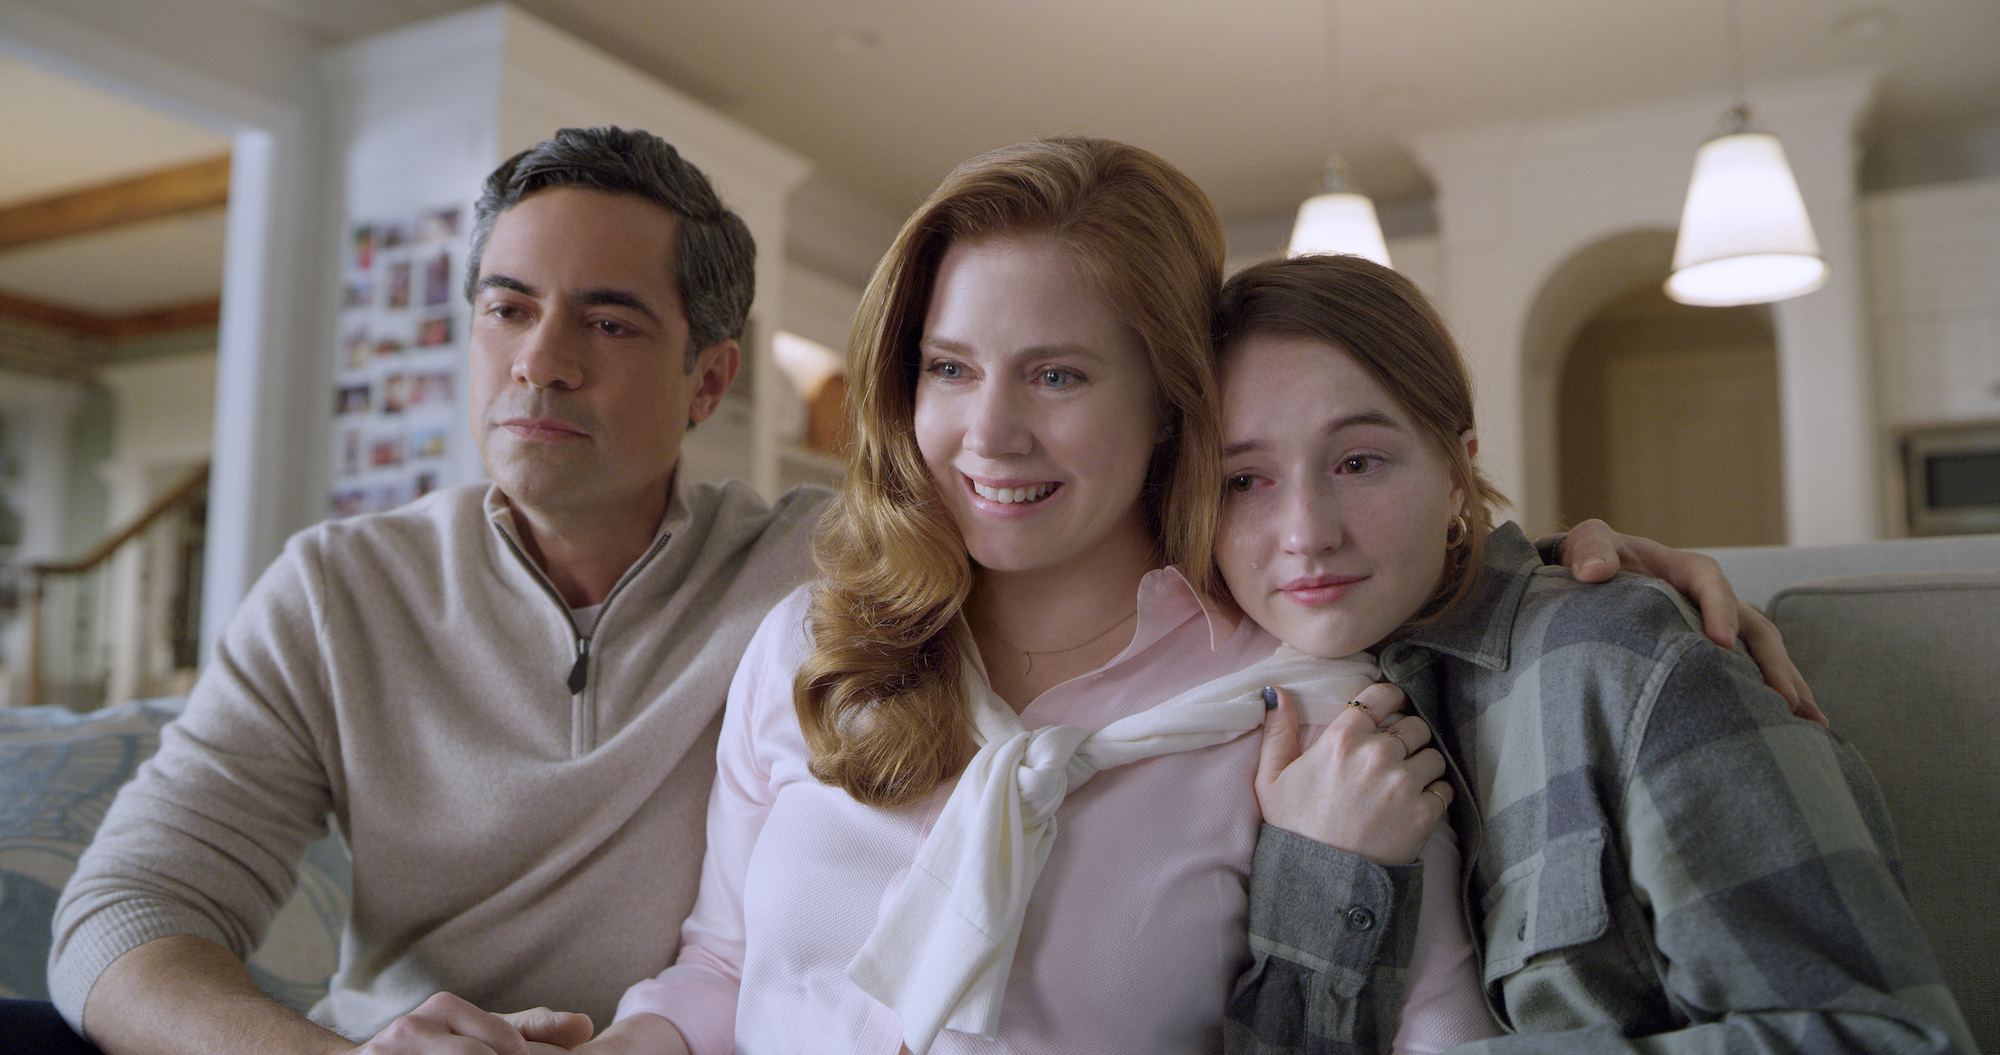 Danny Pino as Larry Mora, Amy Adams as Cynthia Murphy, and Kaitlyn Dever as Zoe Murphy in the 'Dear Evan Hansen' movie. They sit on a couch in a home with their arms around each other. Adams is smiling and all of them have tears in their eyes.